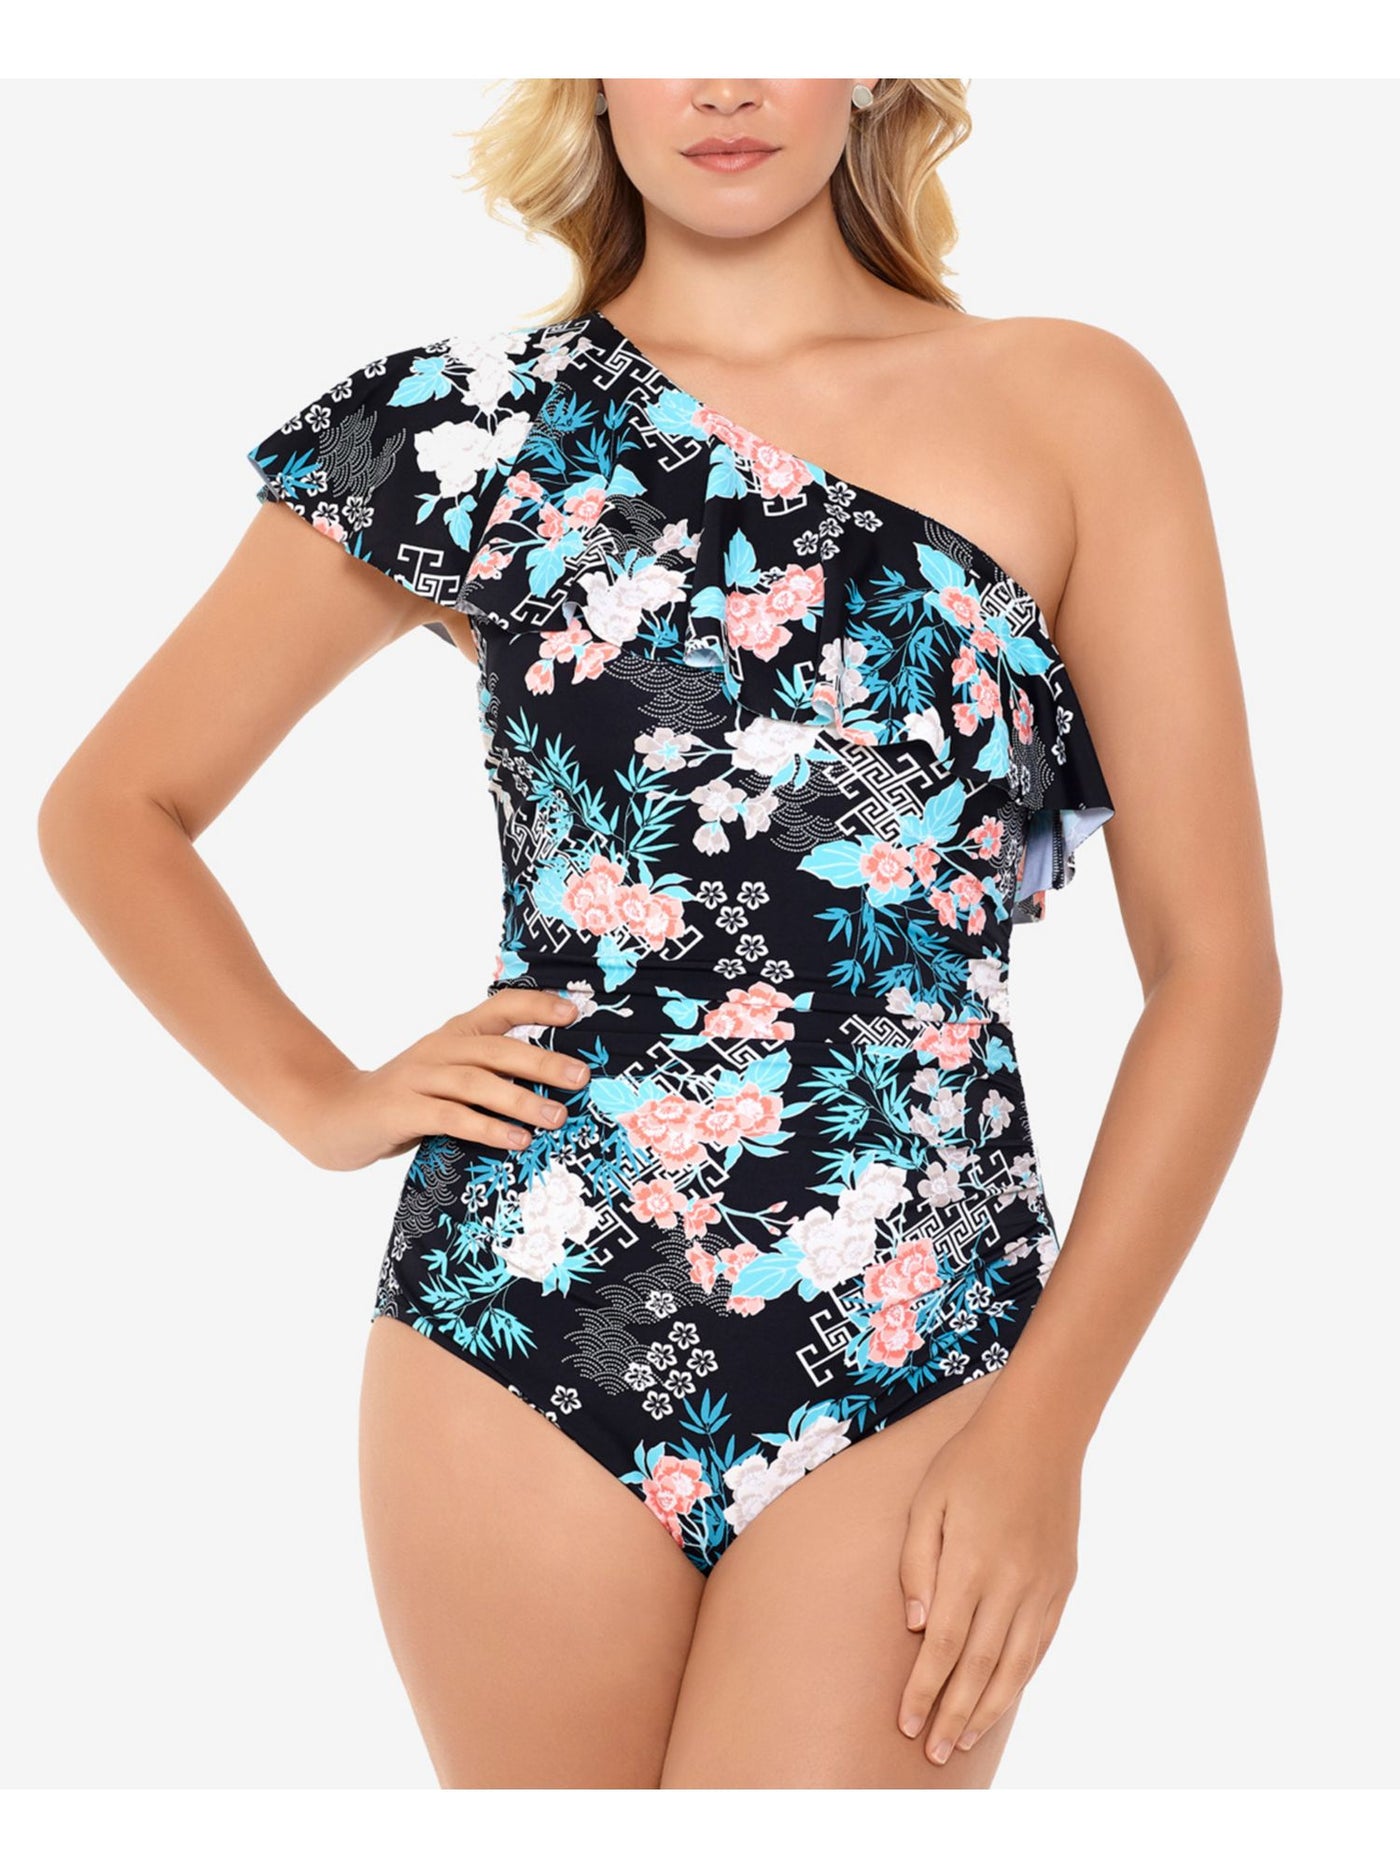 SWIM SOLUTIONS Women's Black Tropical Print Stretch Allover Slimming Fixed Cups Full Coverage Ruffled One Shoulder One Piece Swimsuit 14